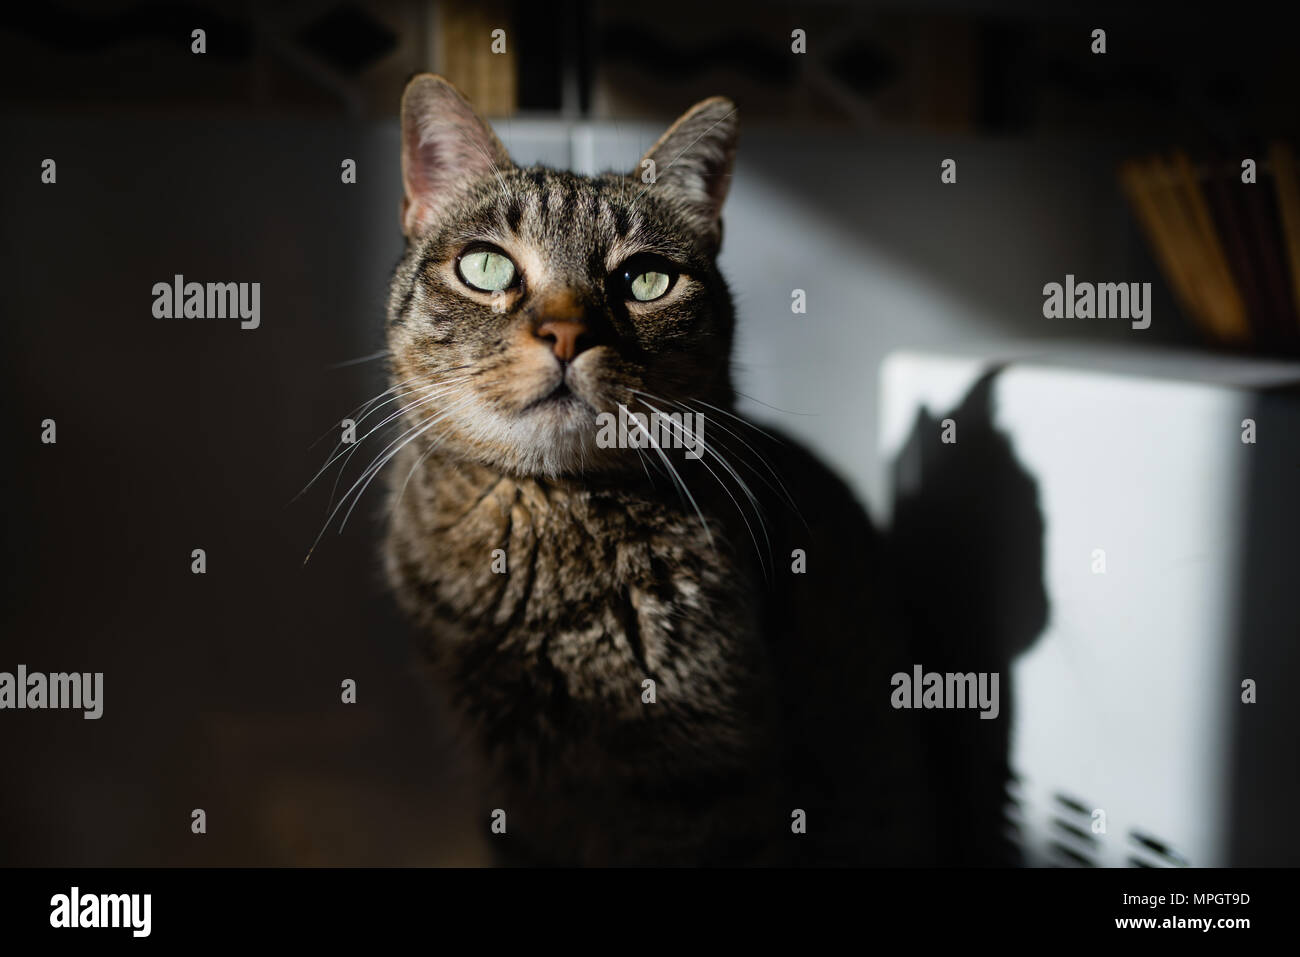 Beautiful tabby cat portrait at home Stock Photo